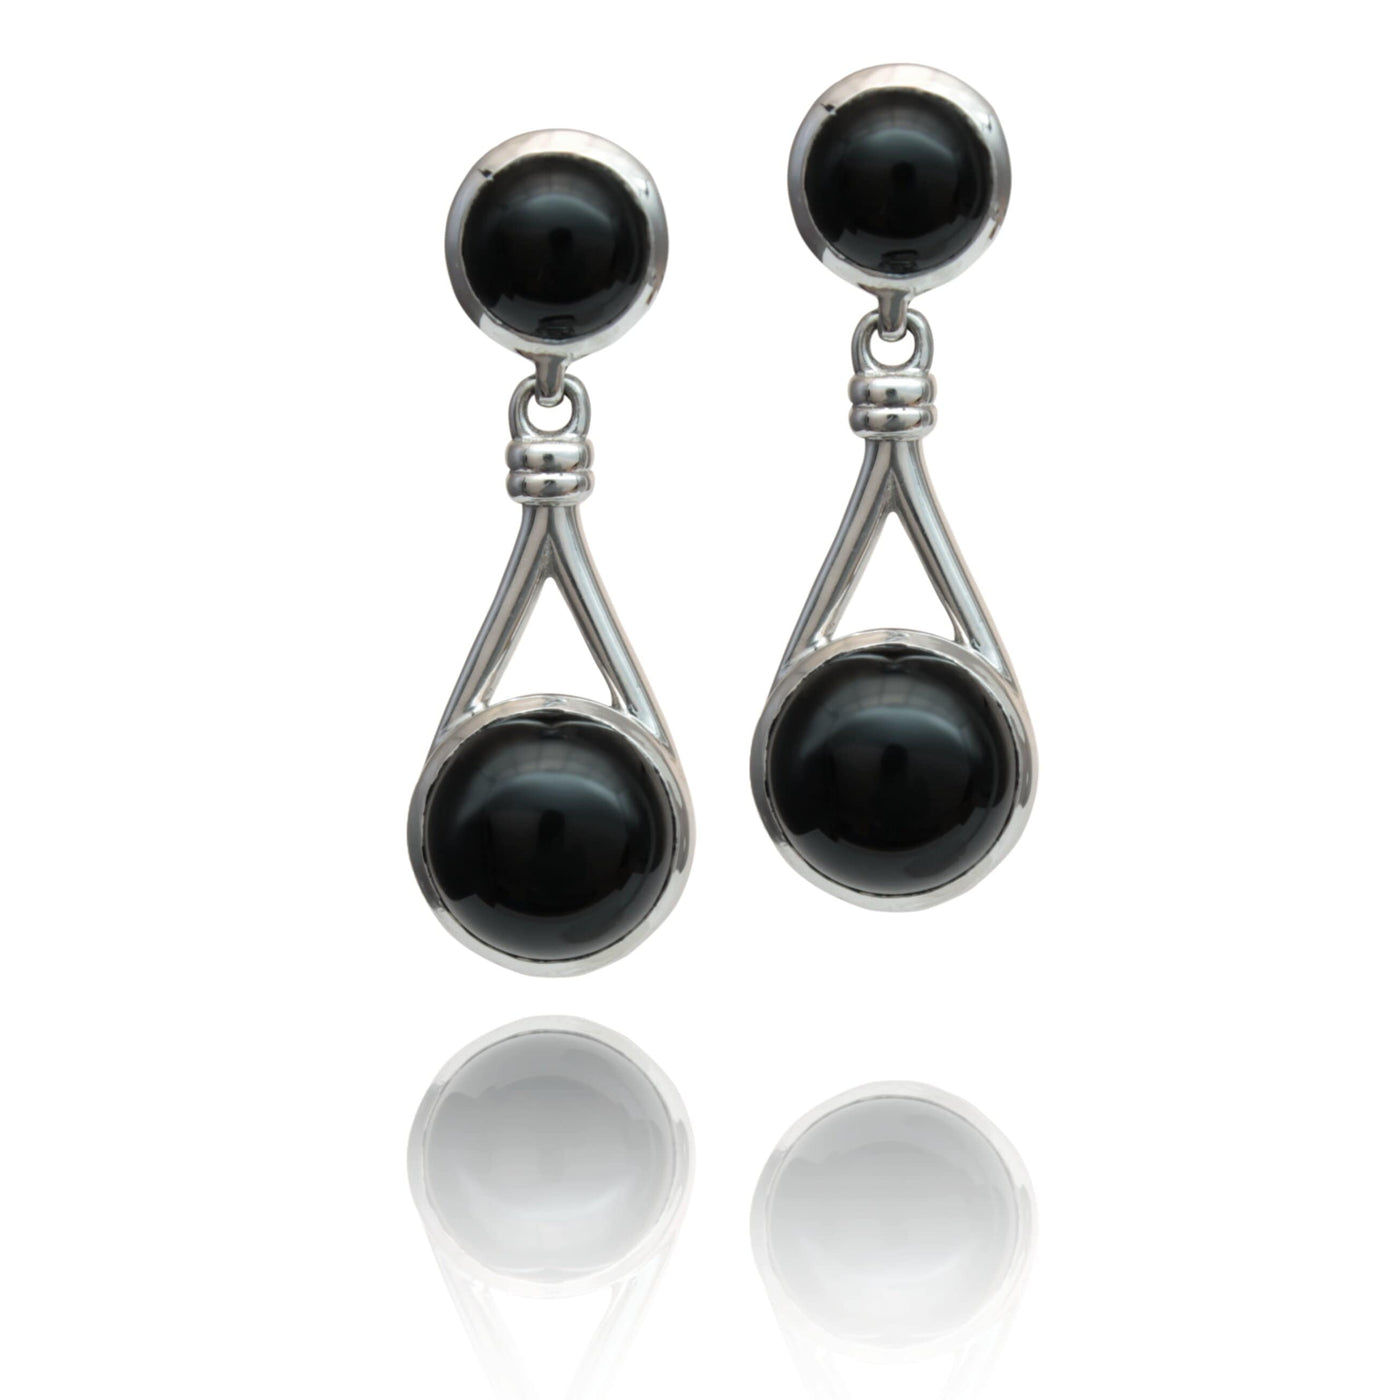 14K White Gold Eclipse Collection Dangles - With Black Onyx Cabochons